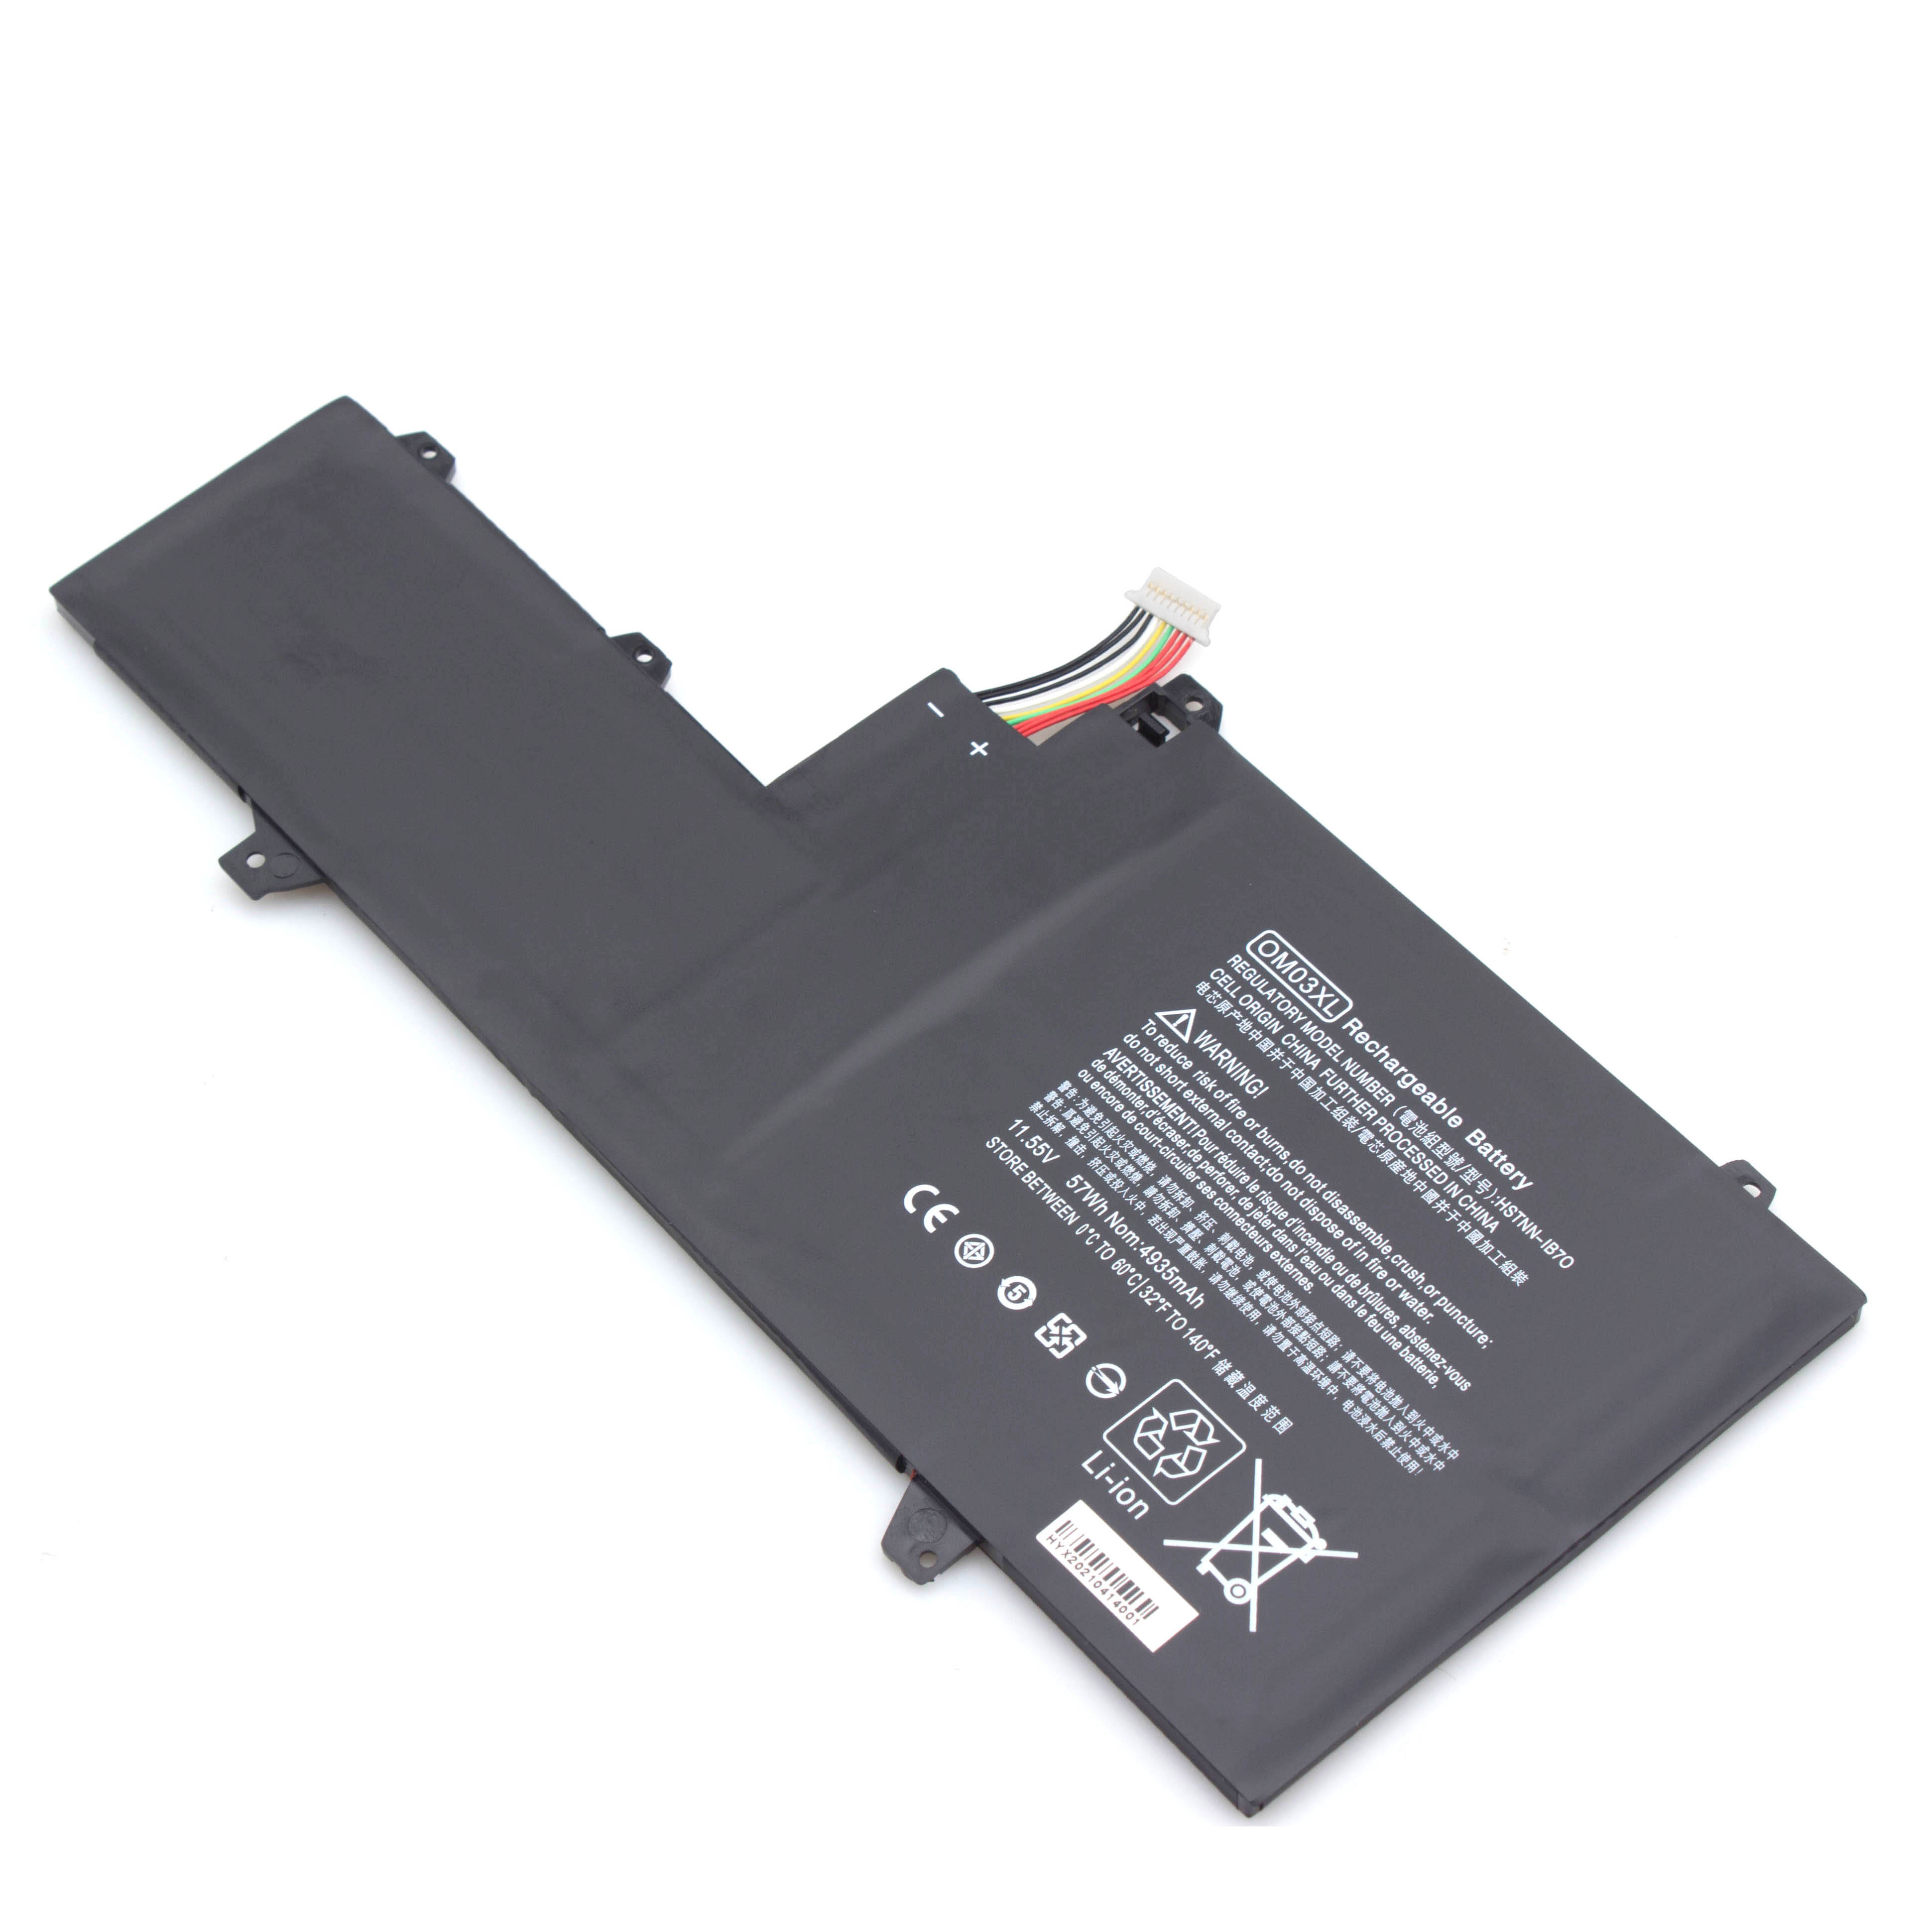 OM03XL rechargeable lithium ion Notebook battery Laptop battery for HP EliteBook x360 1030 G2 series part number OM03 HSTNN-IB7O notebook 11.55v 3800mAh 